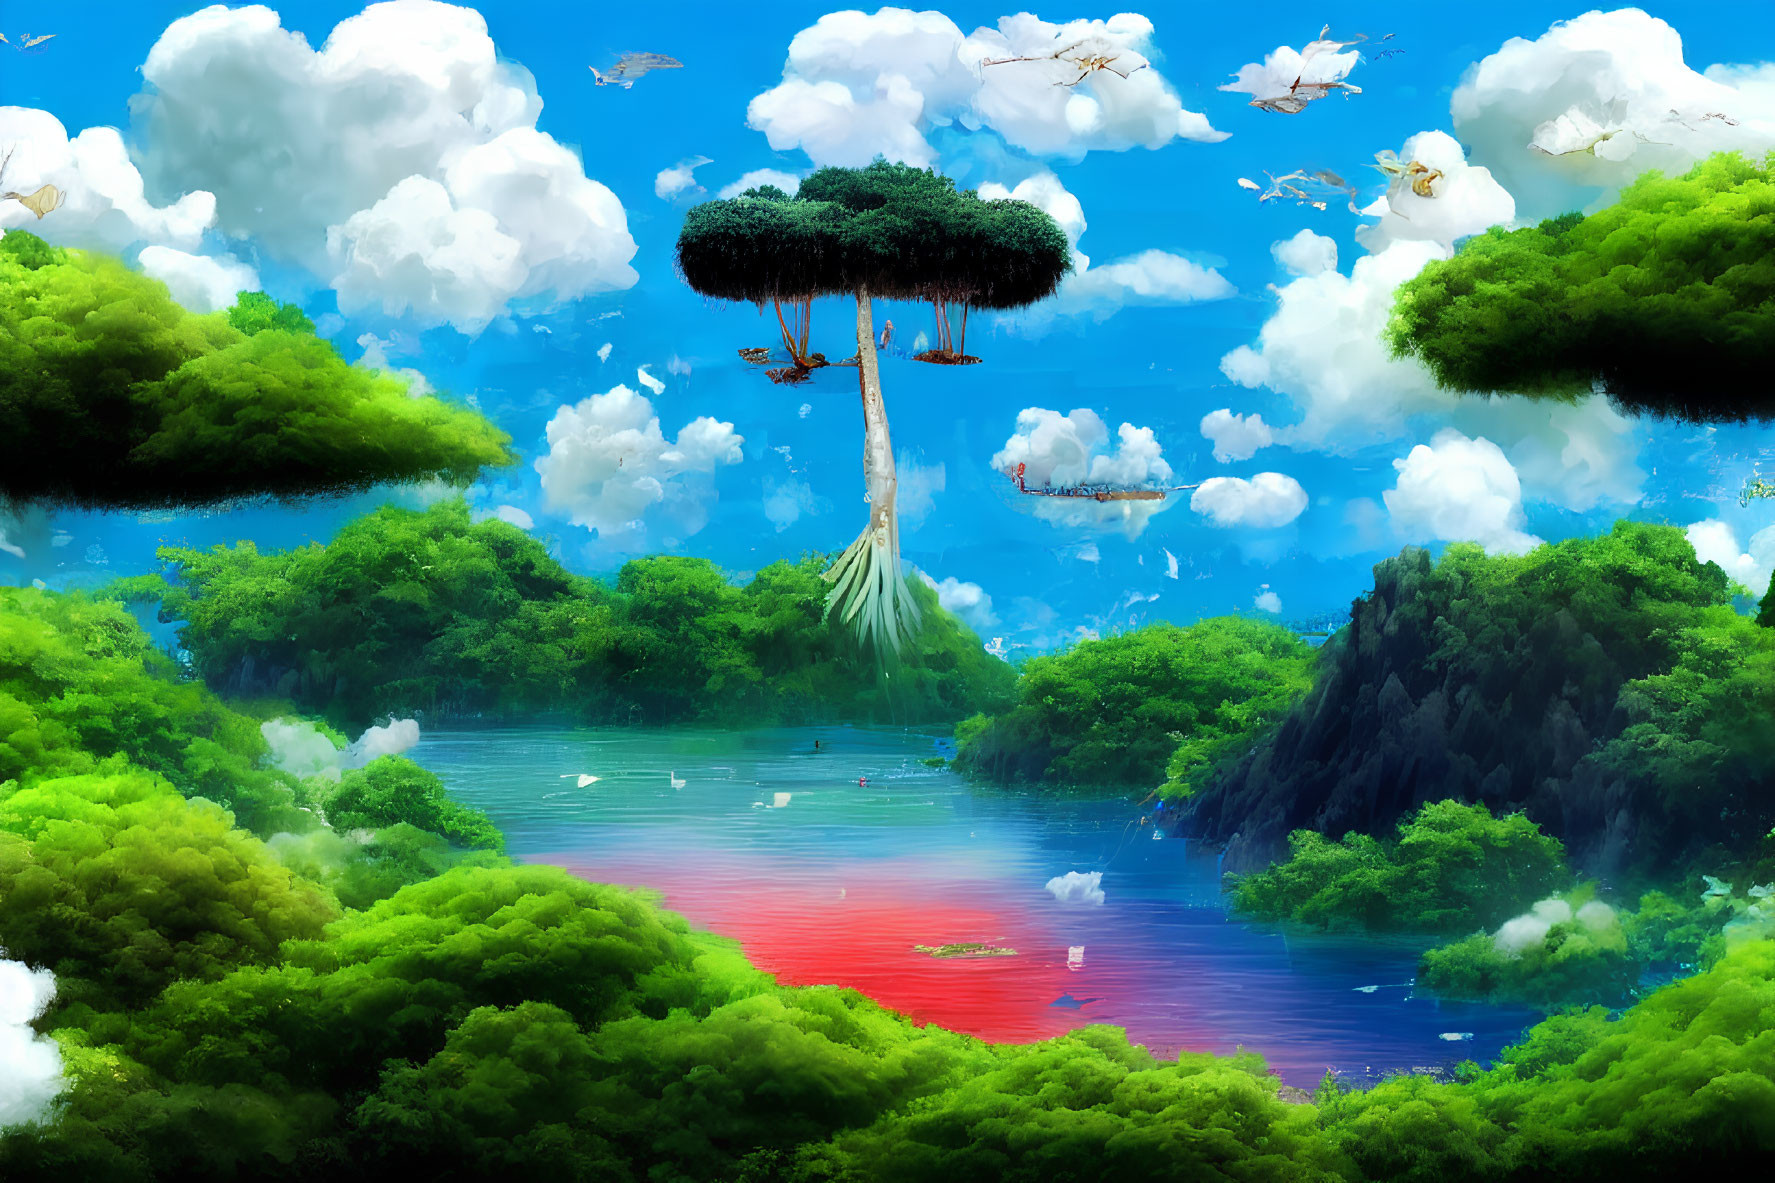 Colorful floating islands with sky-rooted tree in whimsical landscape